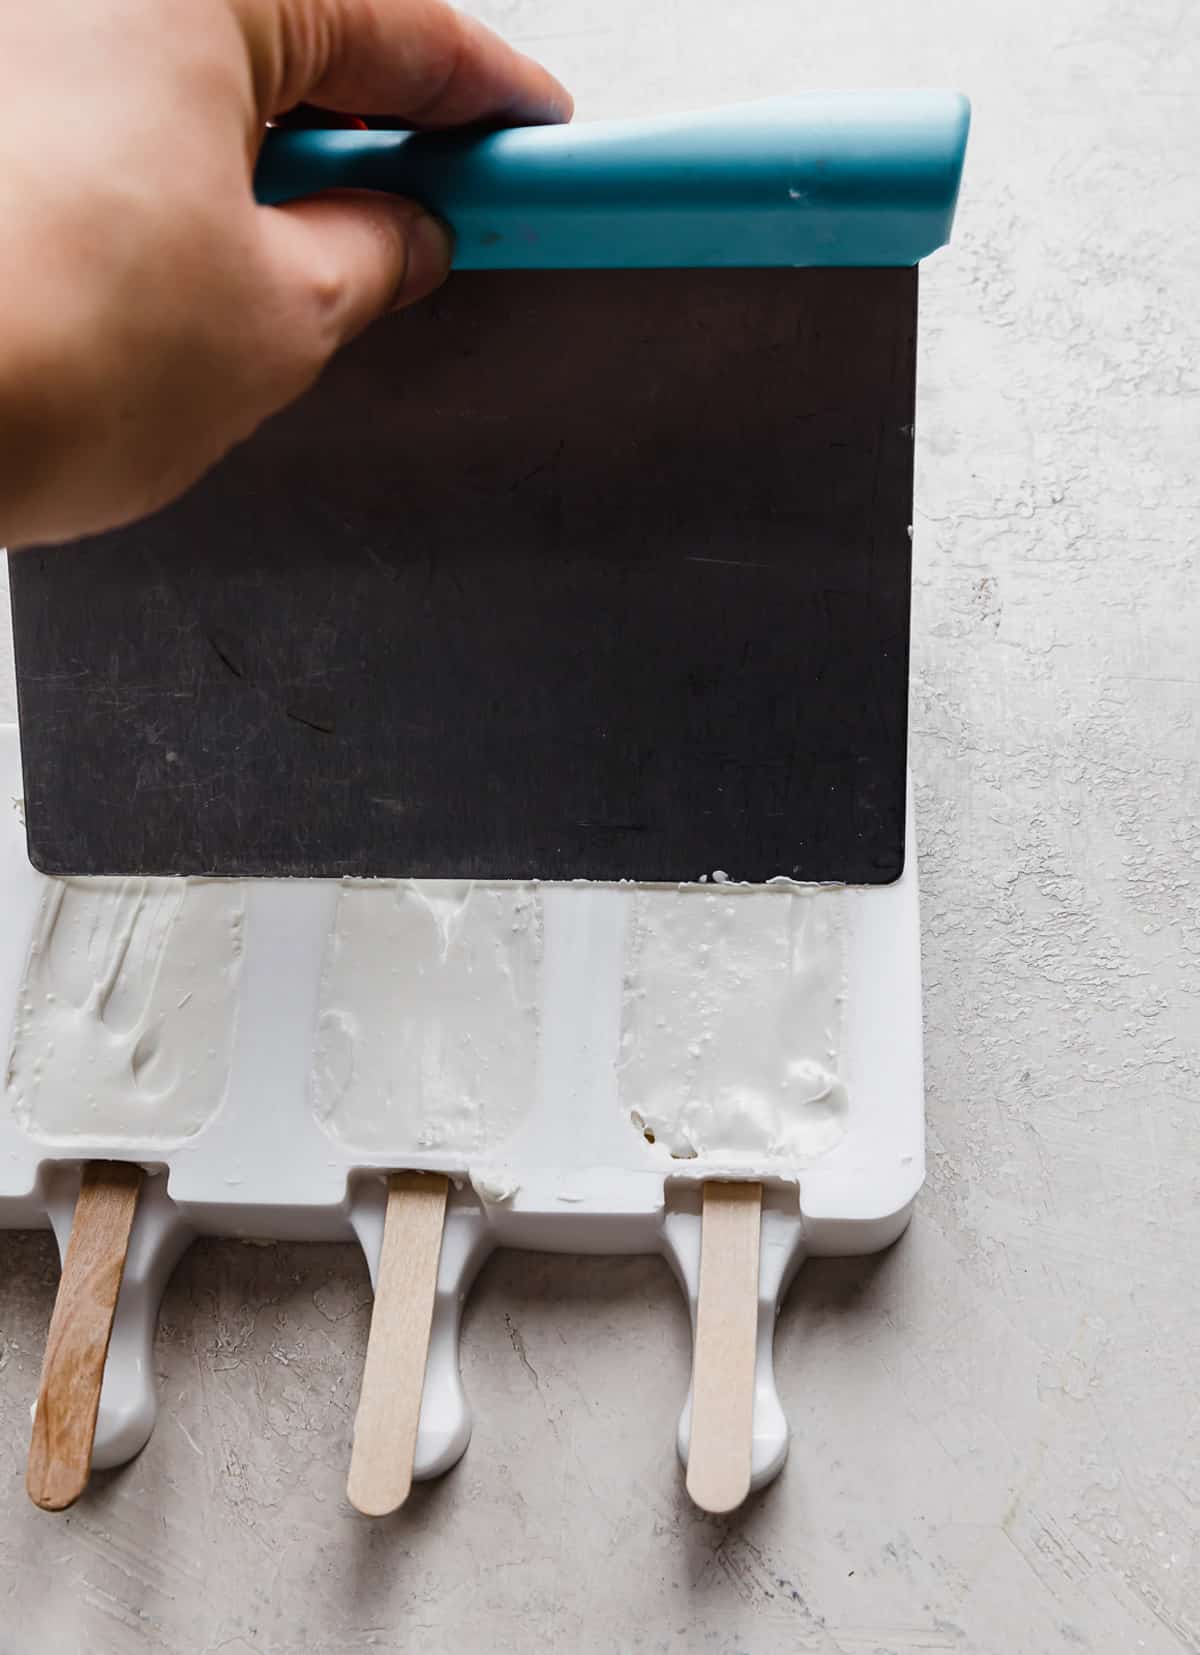 A metal scraper scraping off excess white chocolate from a white Cakesicle mold.